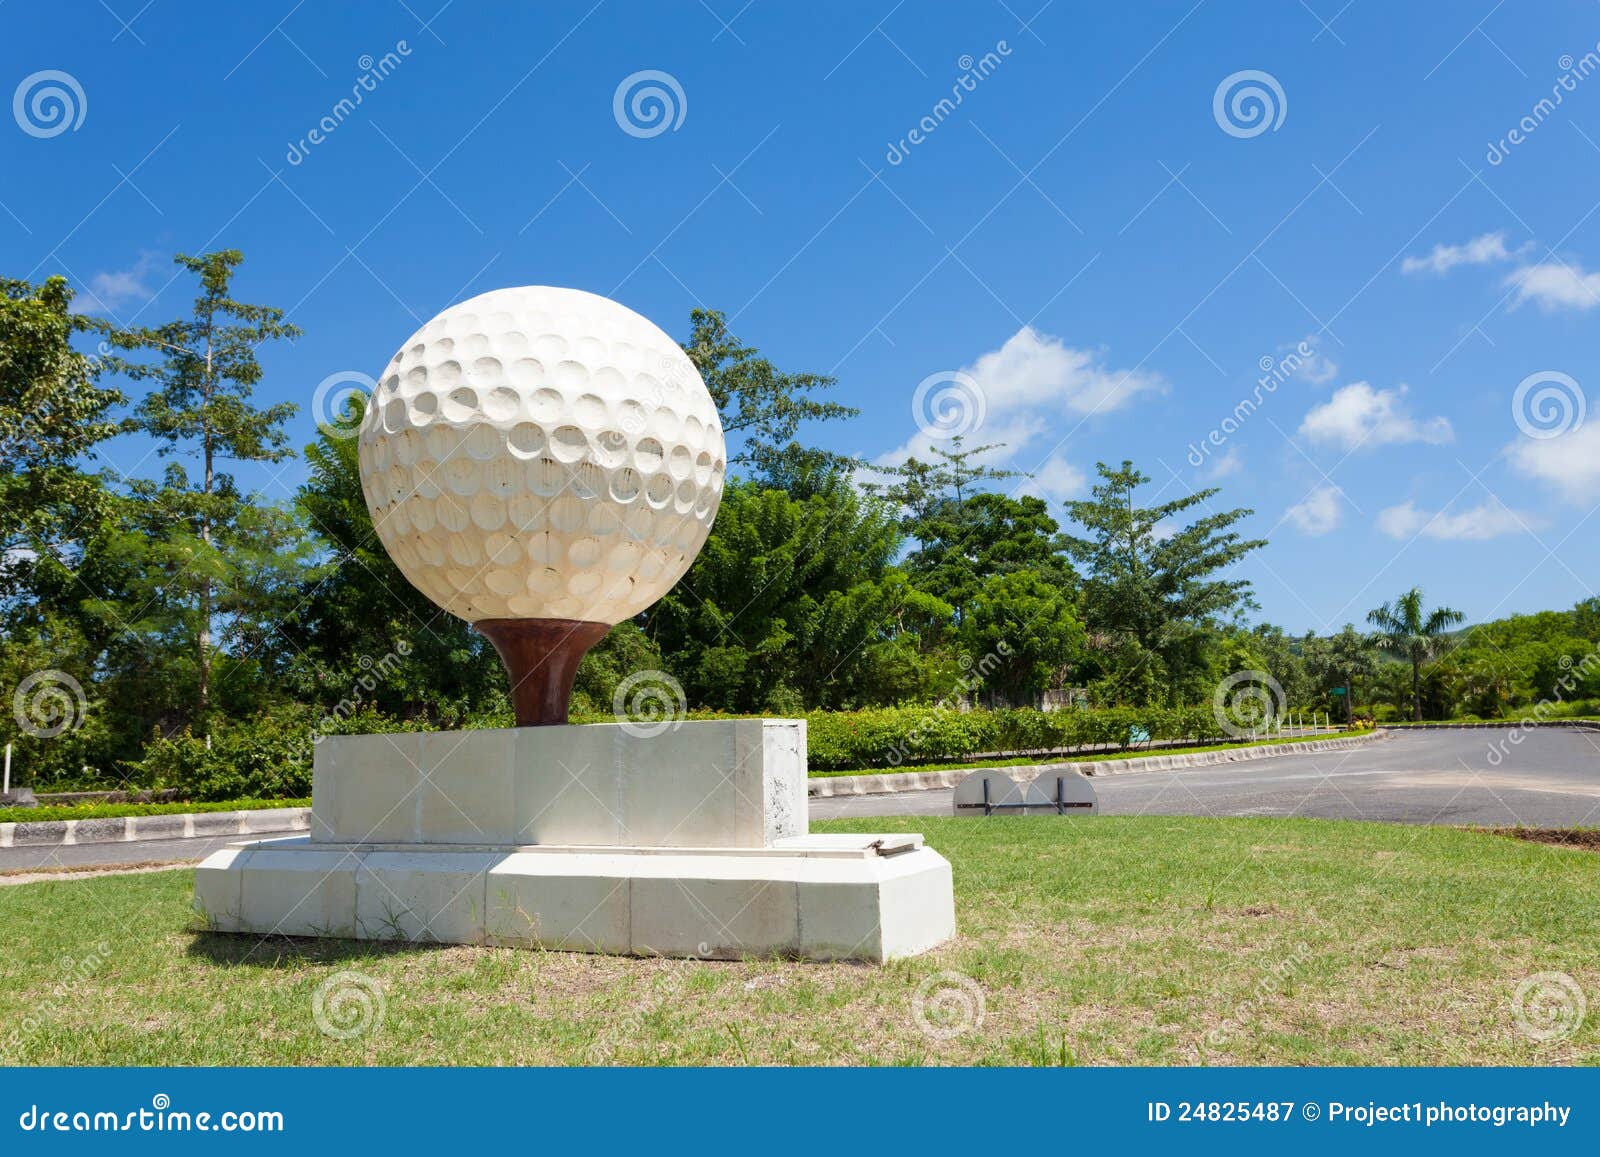 Schurk financieel Lieve Large golf ball stock image. Image of indonesia, country - 24825487